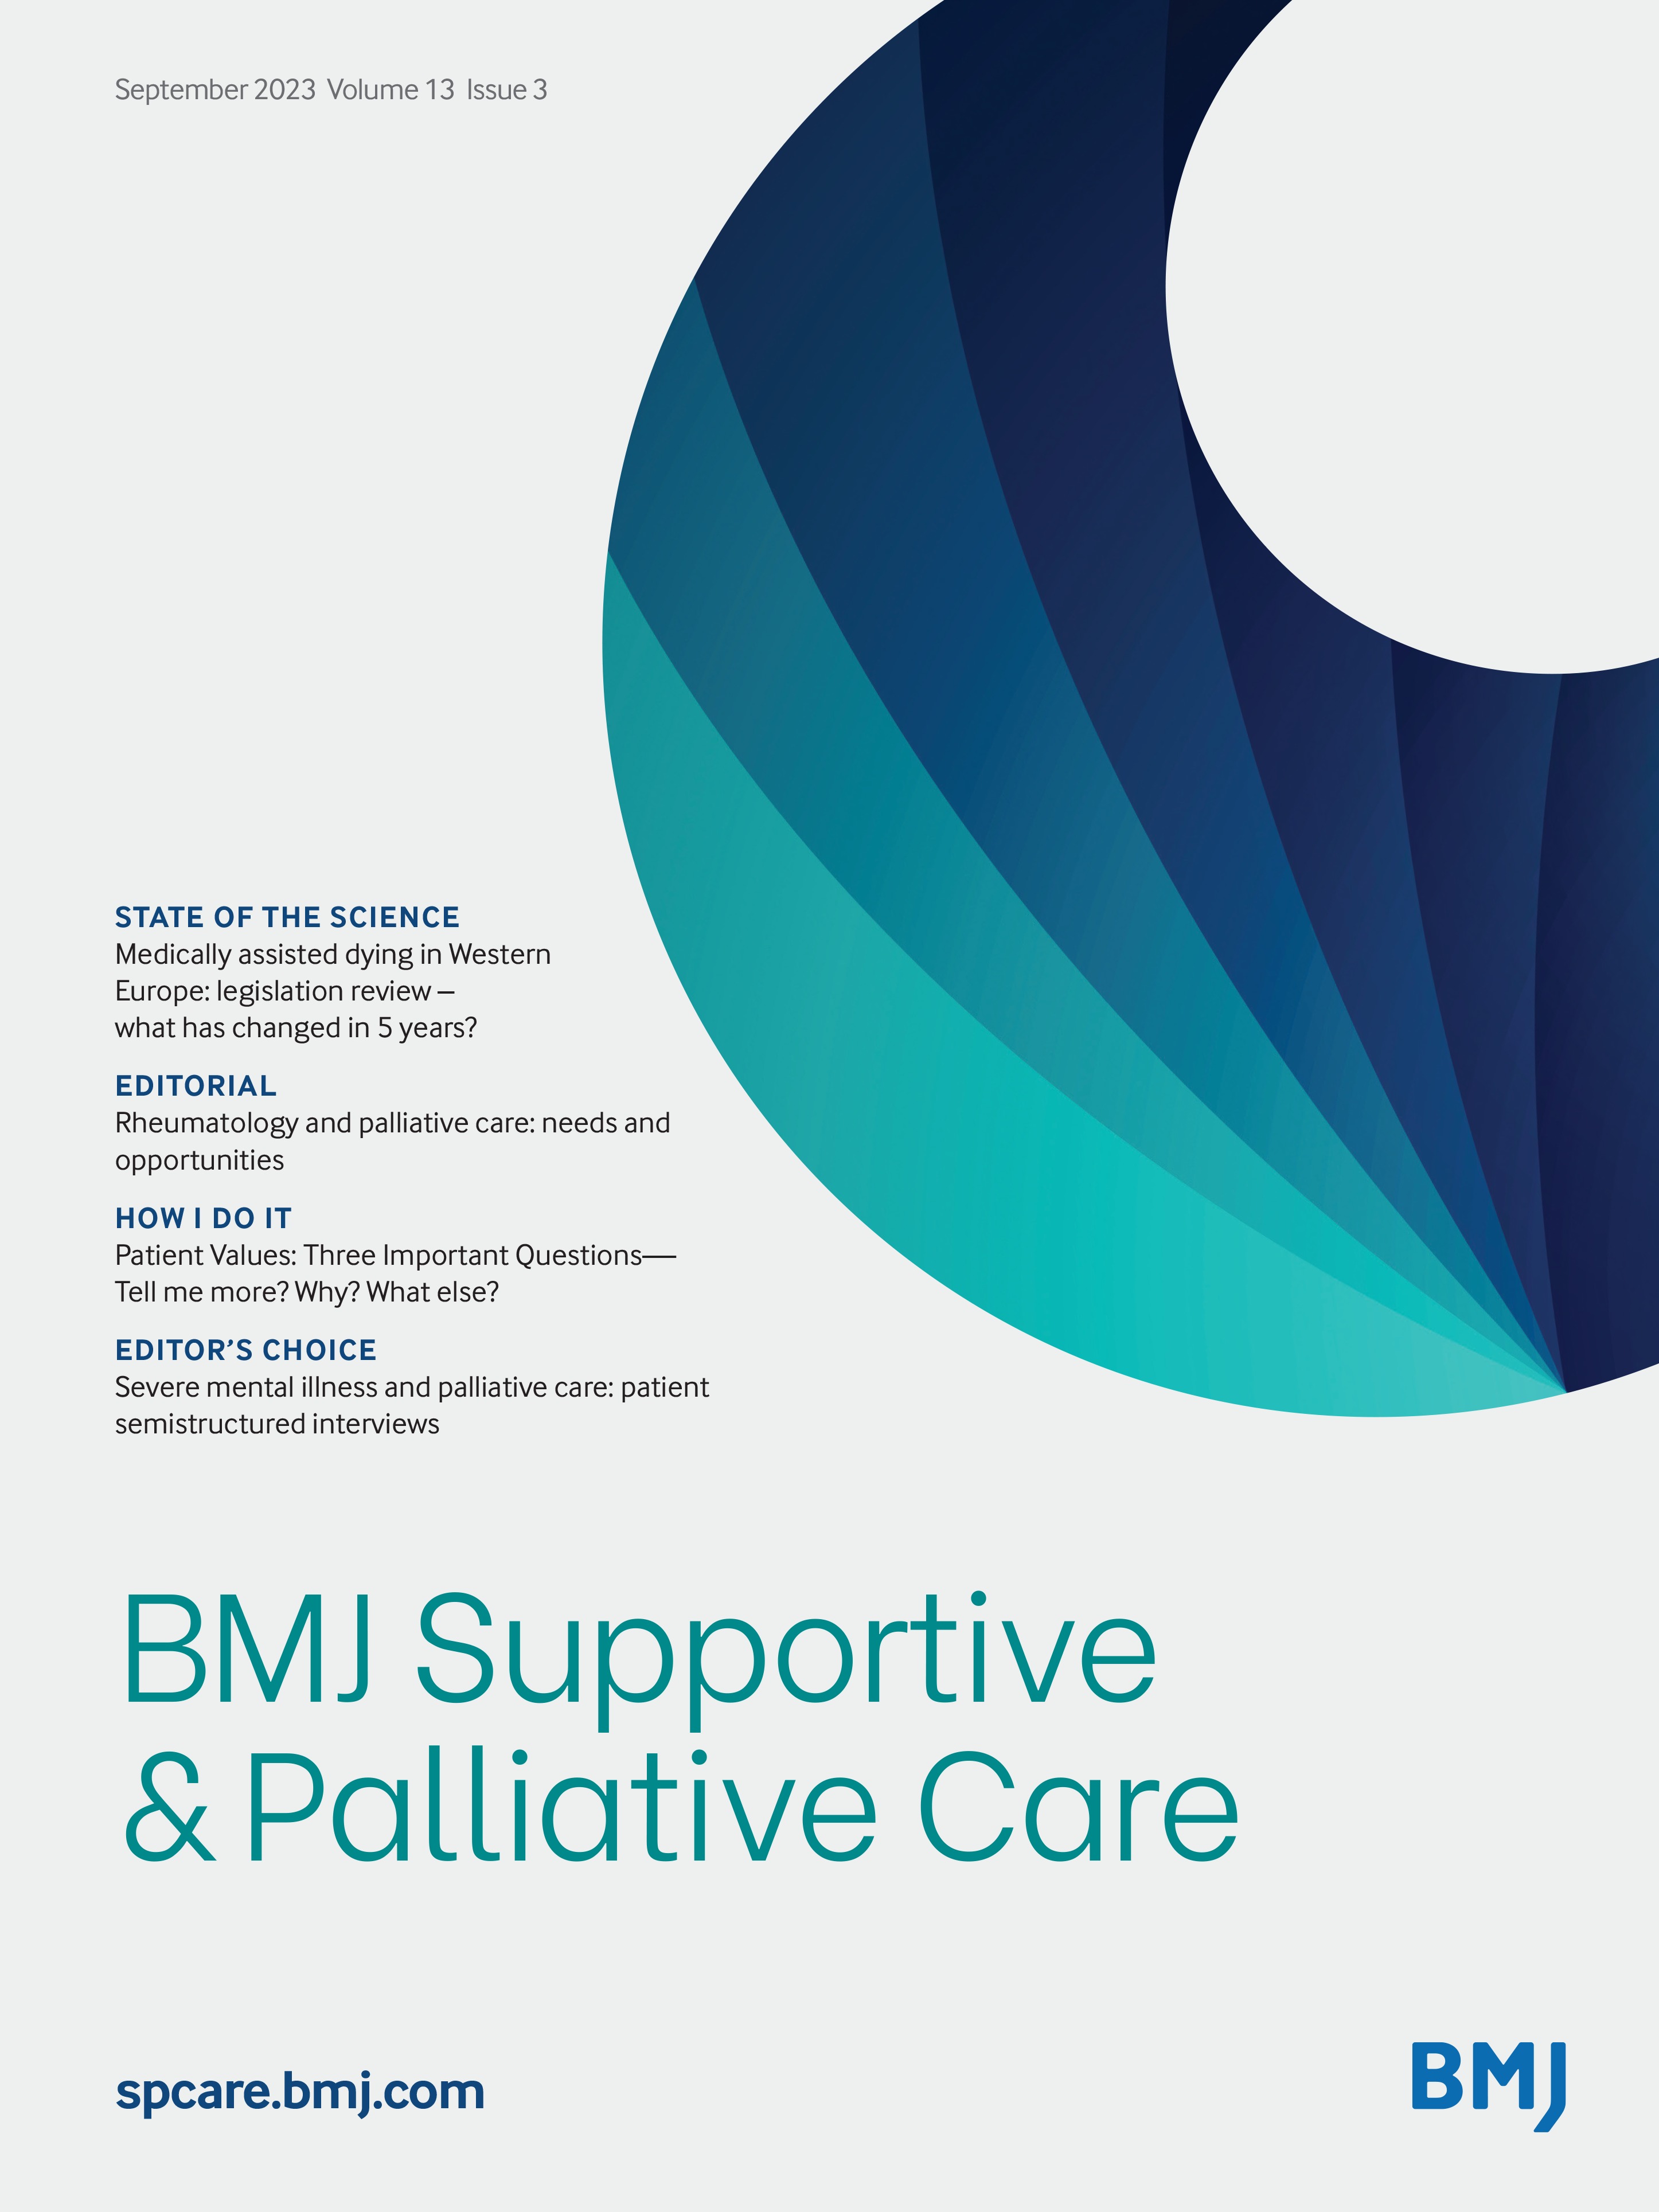 Severe mental illness and palliative care: patient semistructured interviews